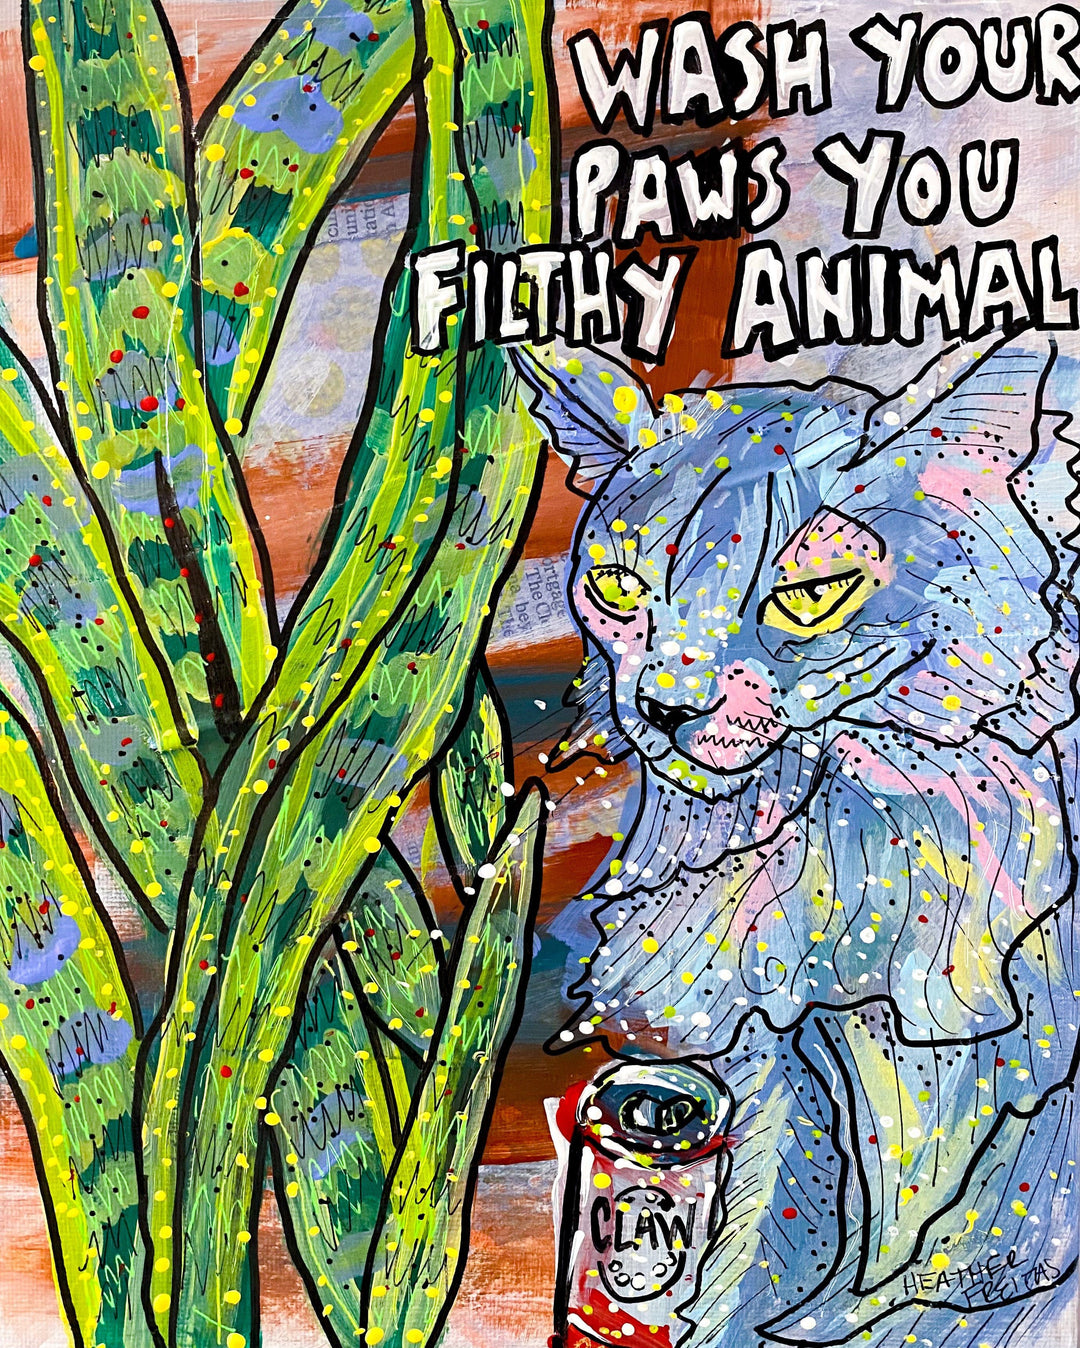 Wash Your Paws You Filthy Animal - Claw Edition Heather Freitas 